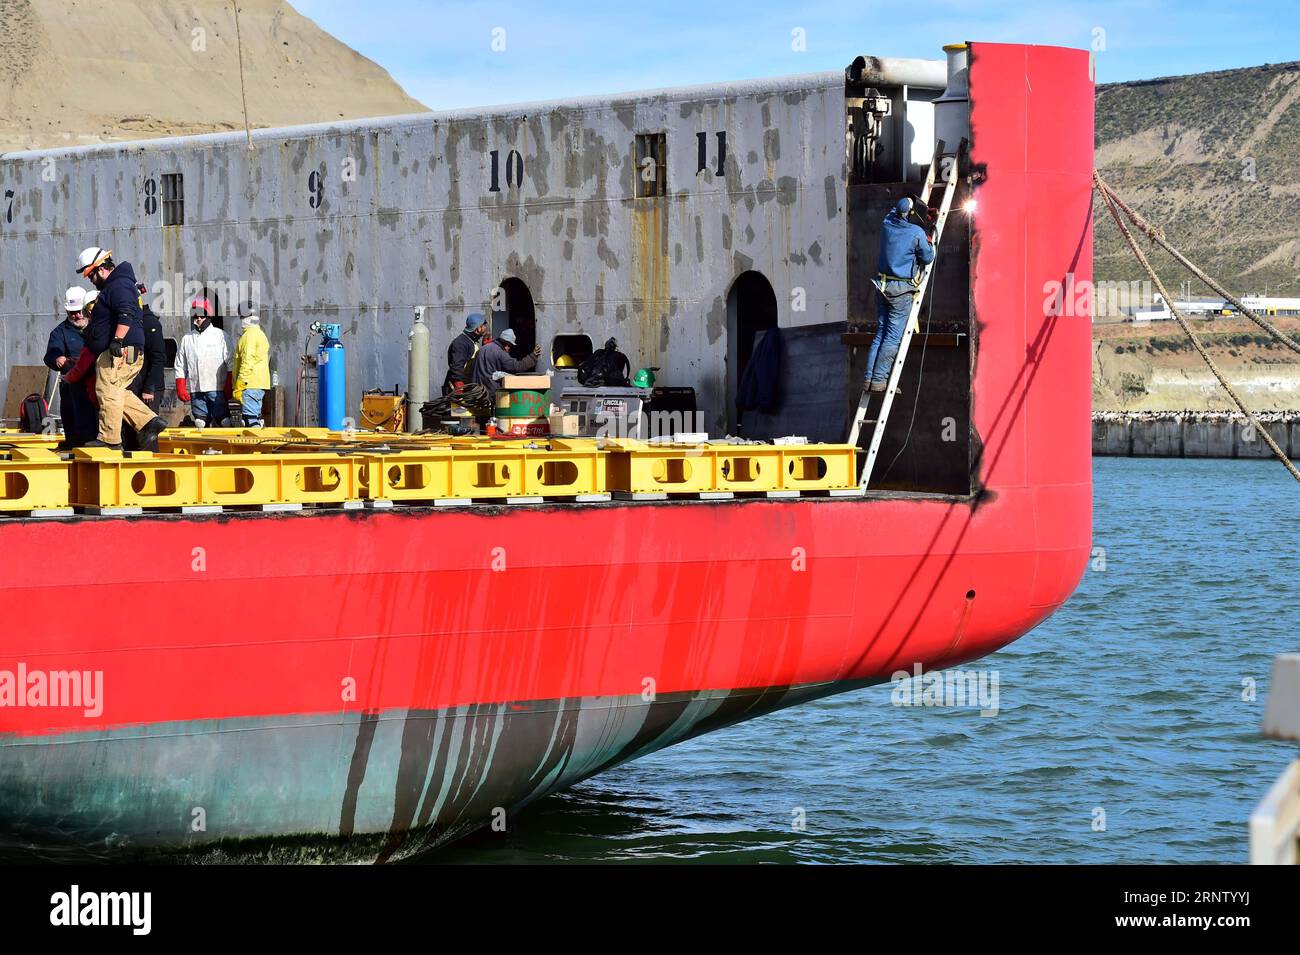 (171125) -- CHUBUT, Nov. 25, 2017 -- Personnel takes part in the preparations of boats that will serve for the transfer of equipment and logistics to help with the search of the missing submarine, on the maritime wharf of Comodoro Rivadavia, province of Chubut, Argentina, on Nov. 24, 2017. Argentinean President Mauricio Macri ordered on Friday a serious investigation into the circumstances of the missing submarine ARA San Juan, which vanished on Nov. 15 in the South Atlantic with 44 crew on board. Maxi Jonas/TELAM) (ma) (da) (zy) ARGENTINA-CHUBUT-SUBMARINE-INVESTIGATION e TELAM PUBLICATIONxNOT Stock Photo